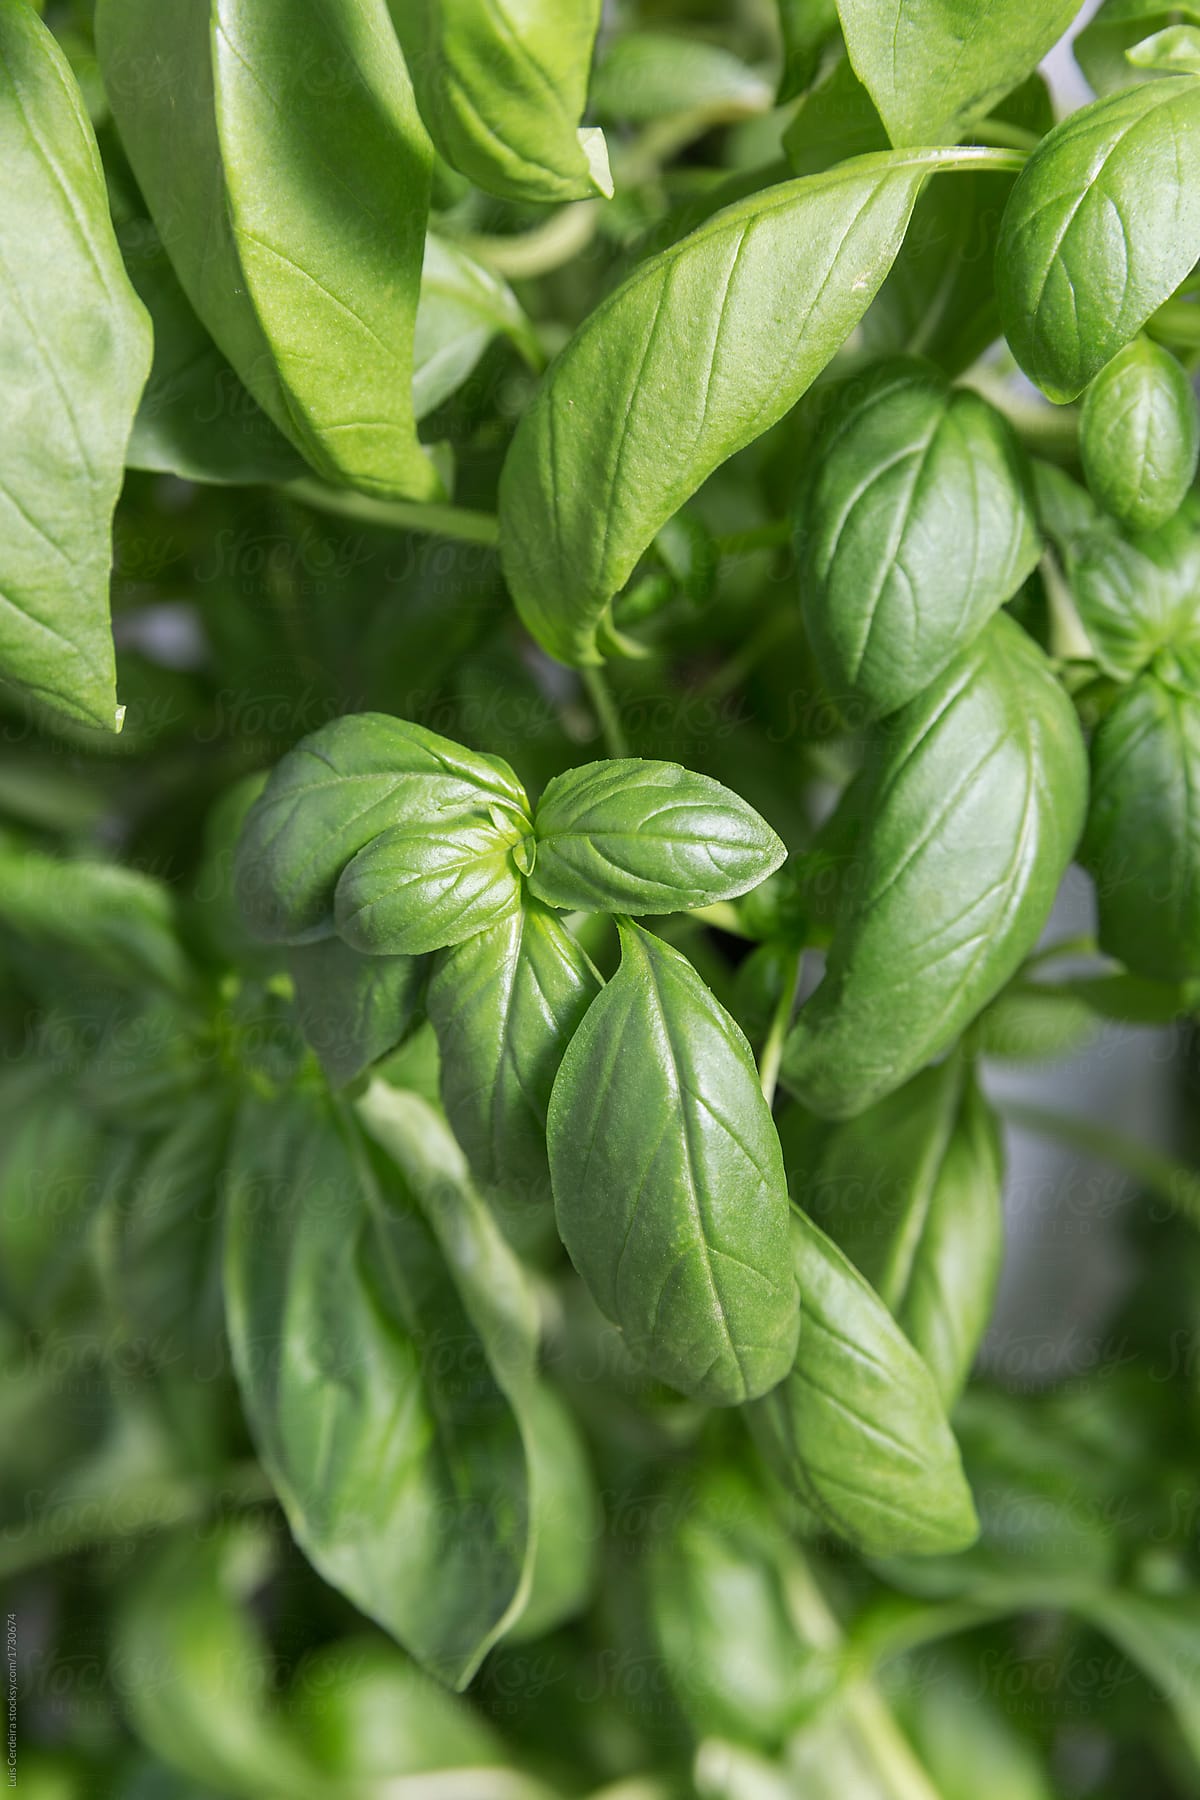 Basil plants growing on an hydroponic tower